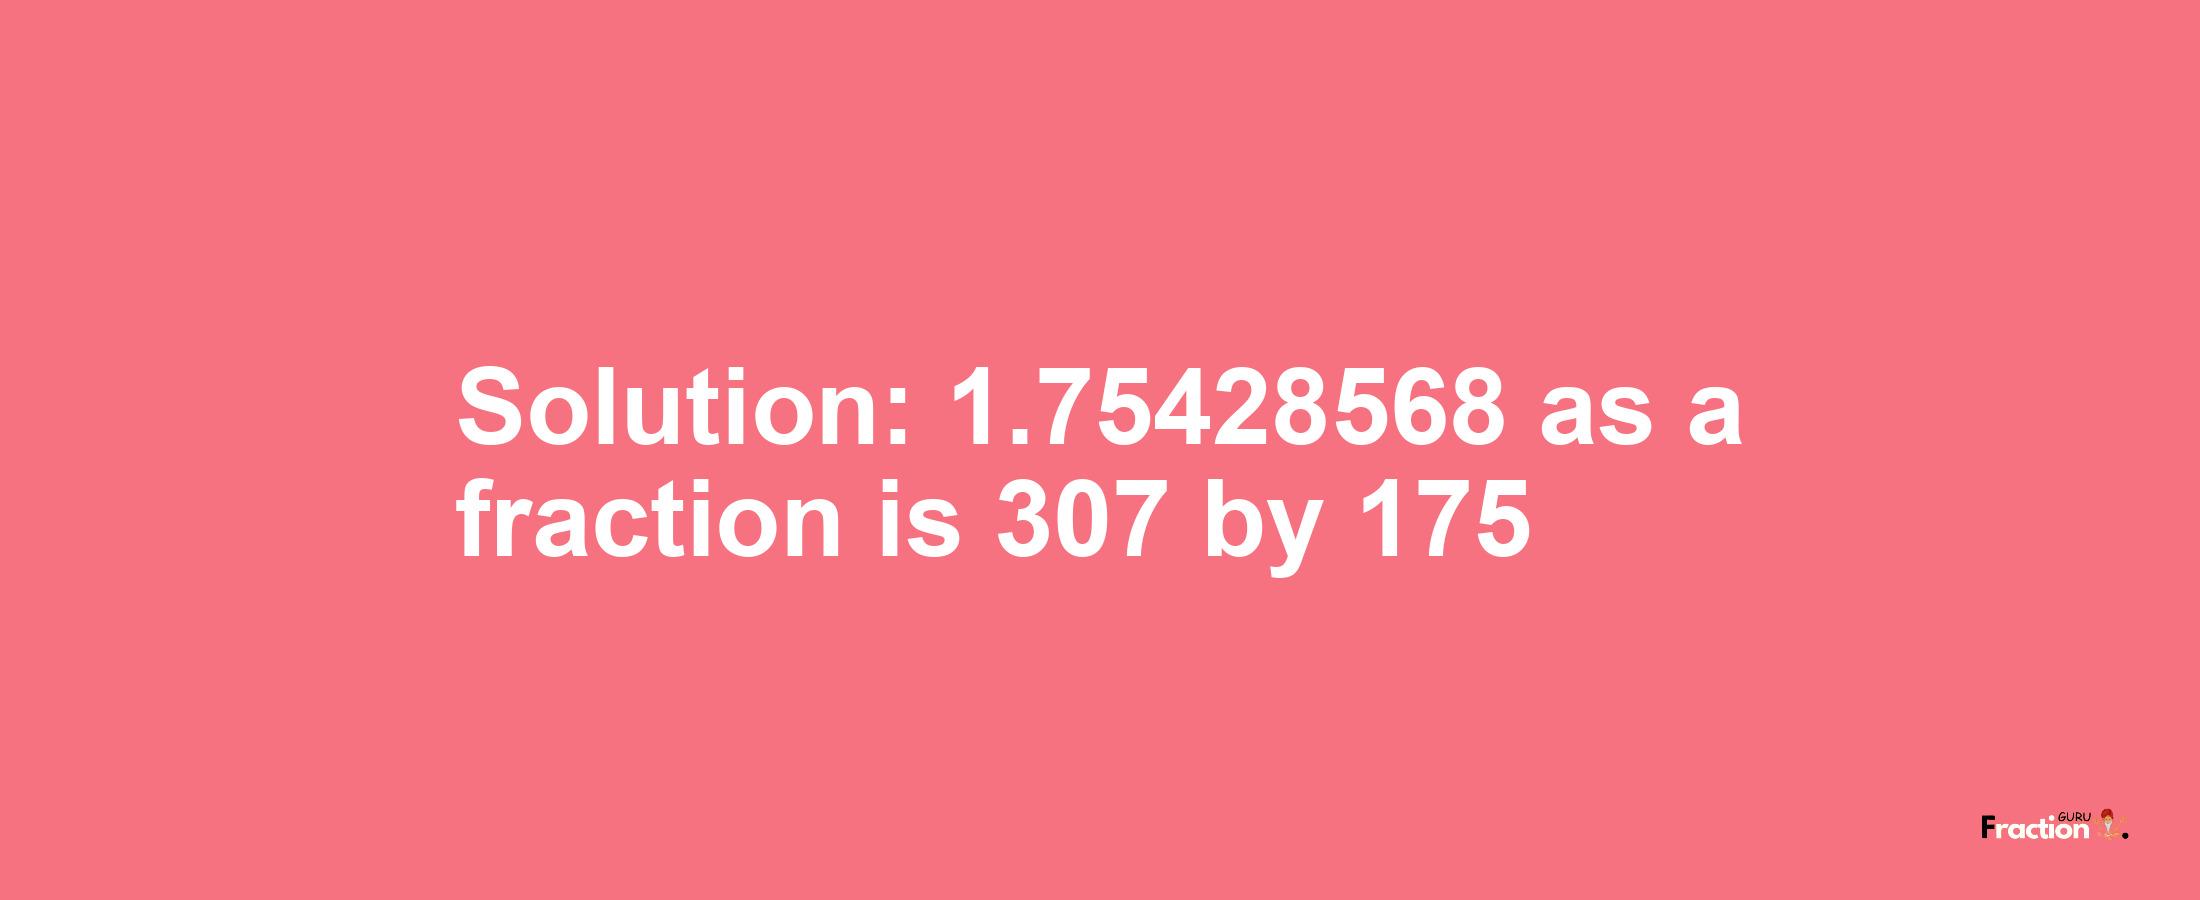 Solution:1.75428568 as a fraction is 307/175